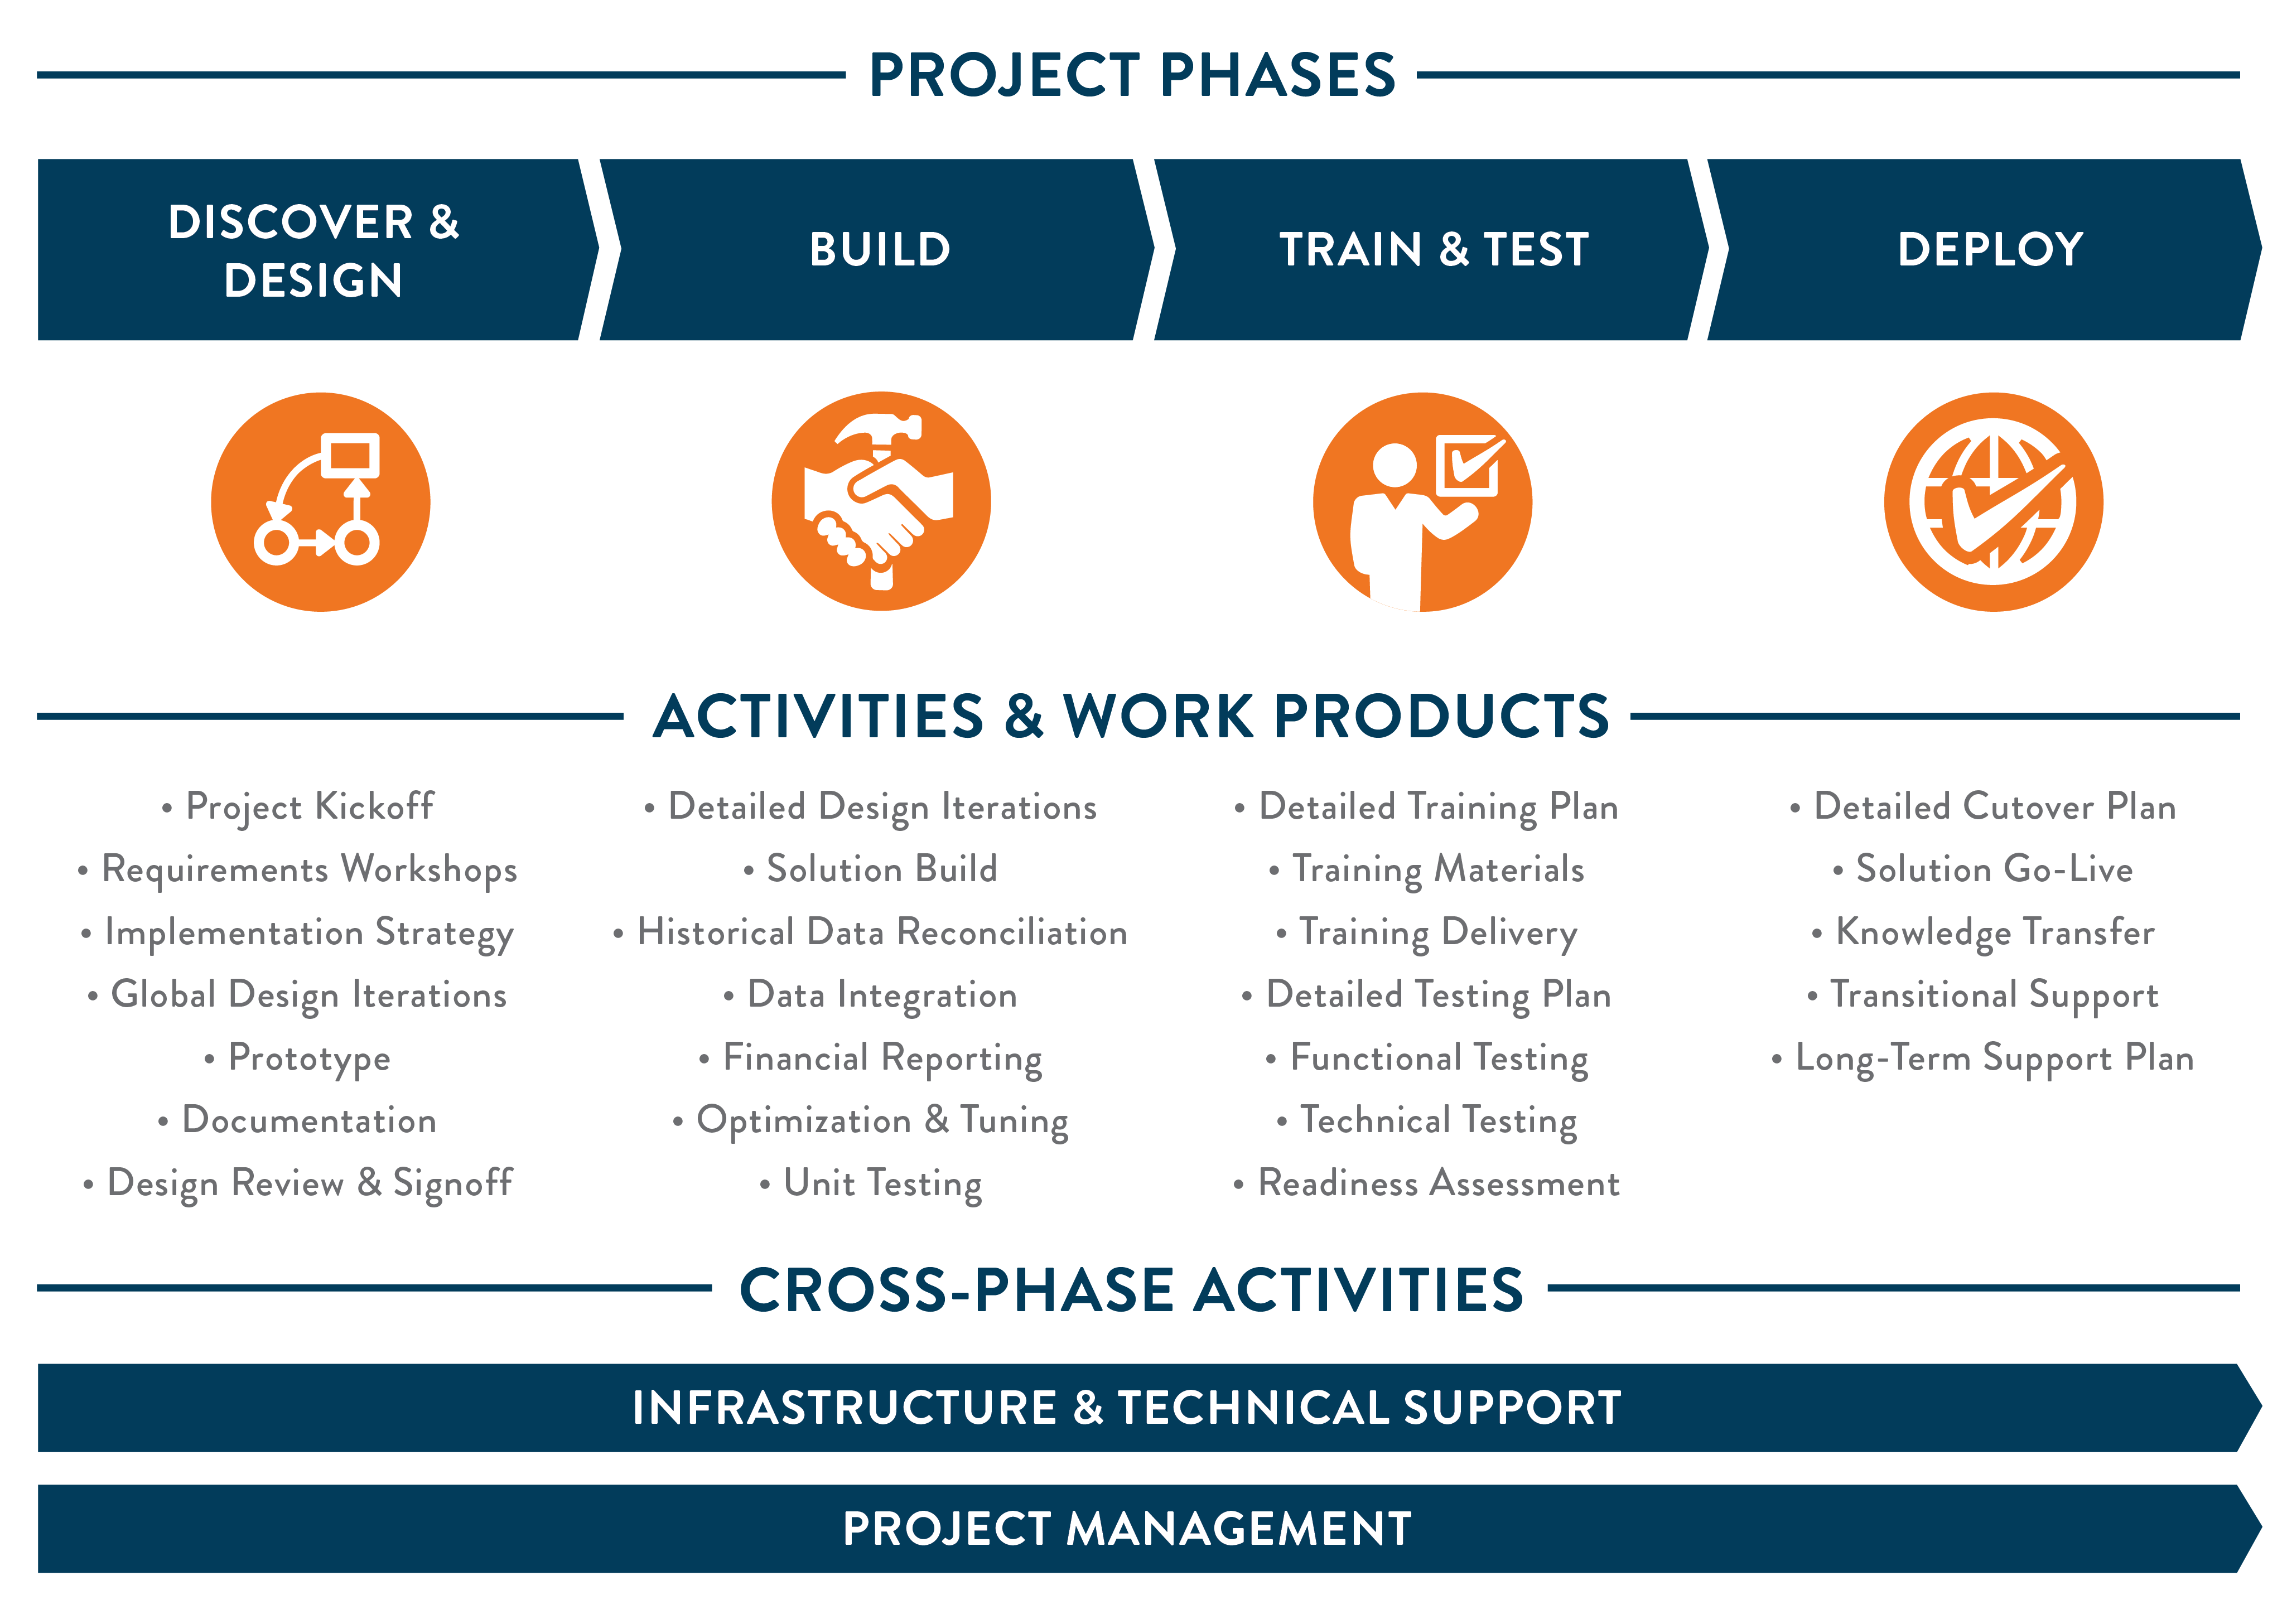 Project phases. Optimization and Tuning. Discovery phase email. Discovery phase email vector.